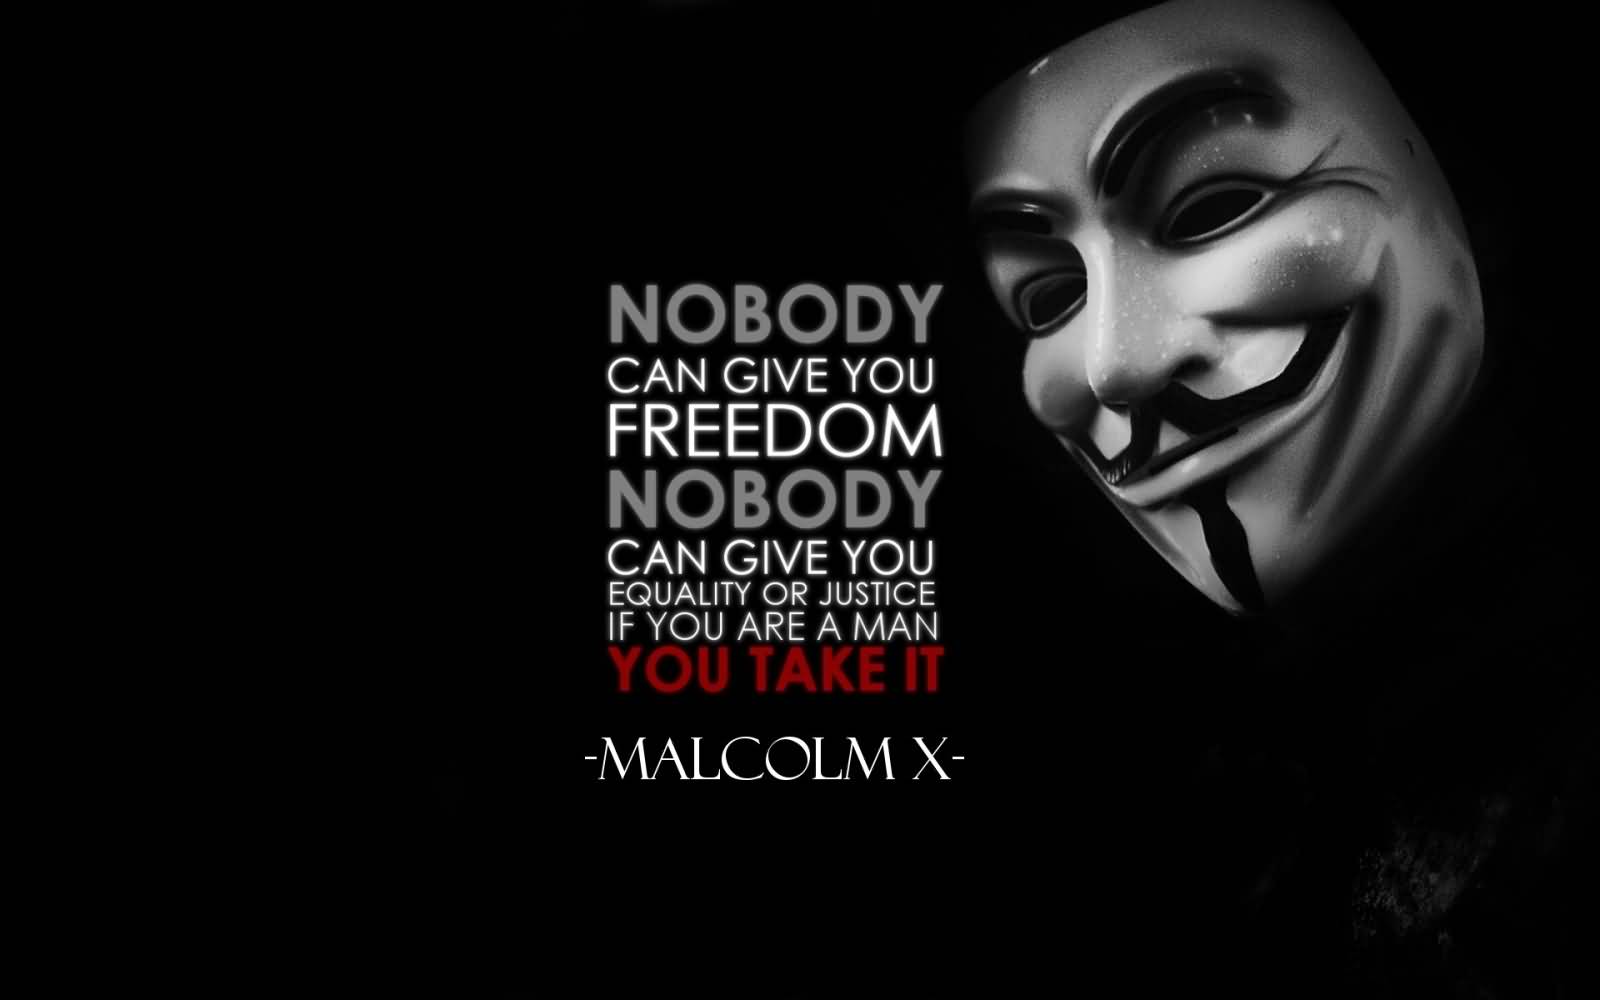 Nobody can give you freedom. Nobody can give you equality or justice or anything. If you’re a man, you take it. Malcolm X